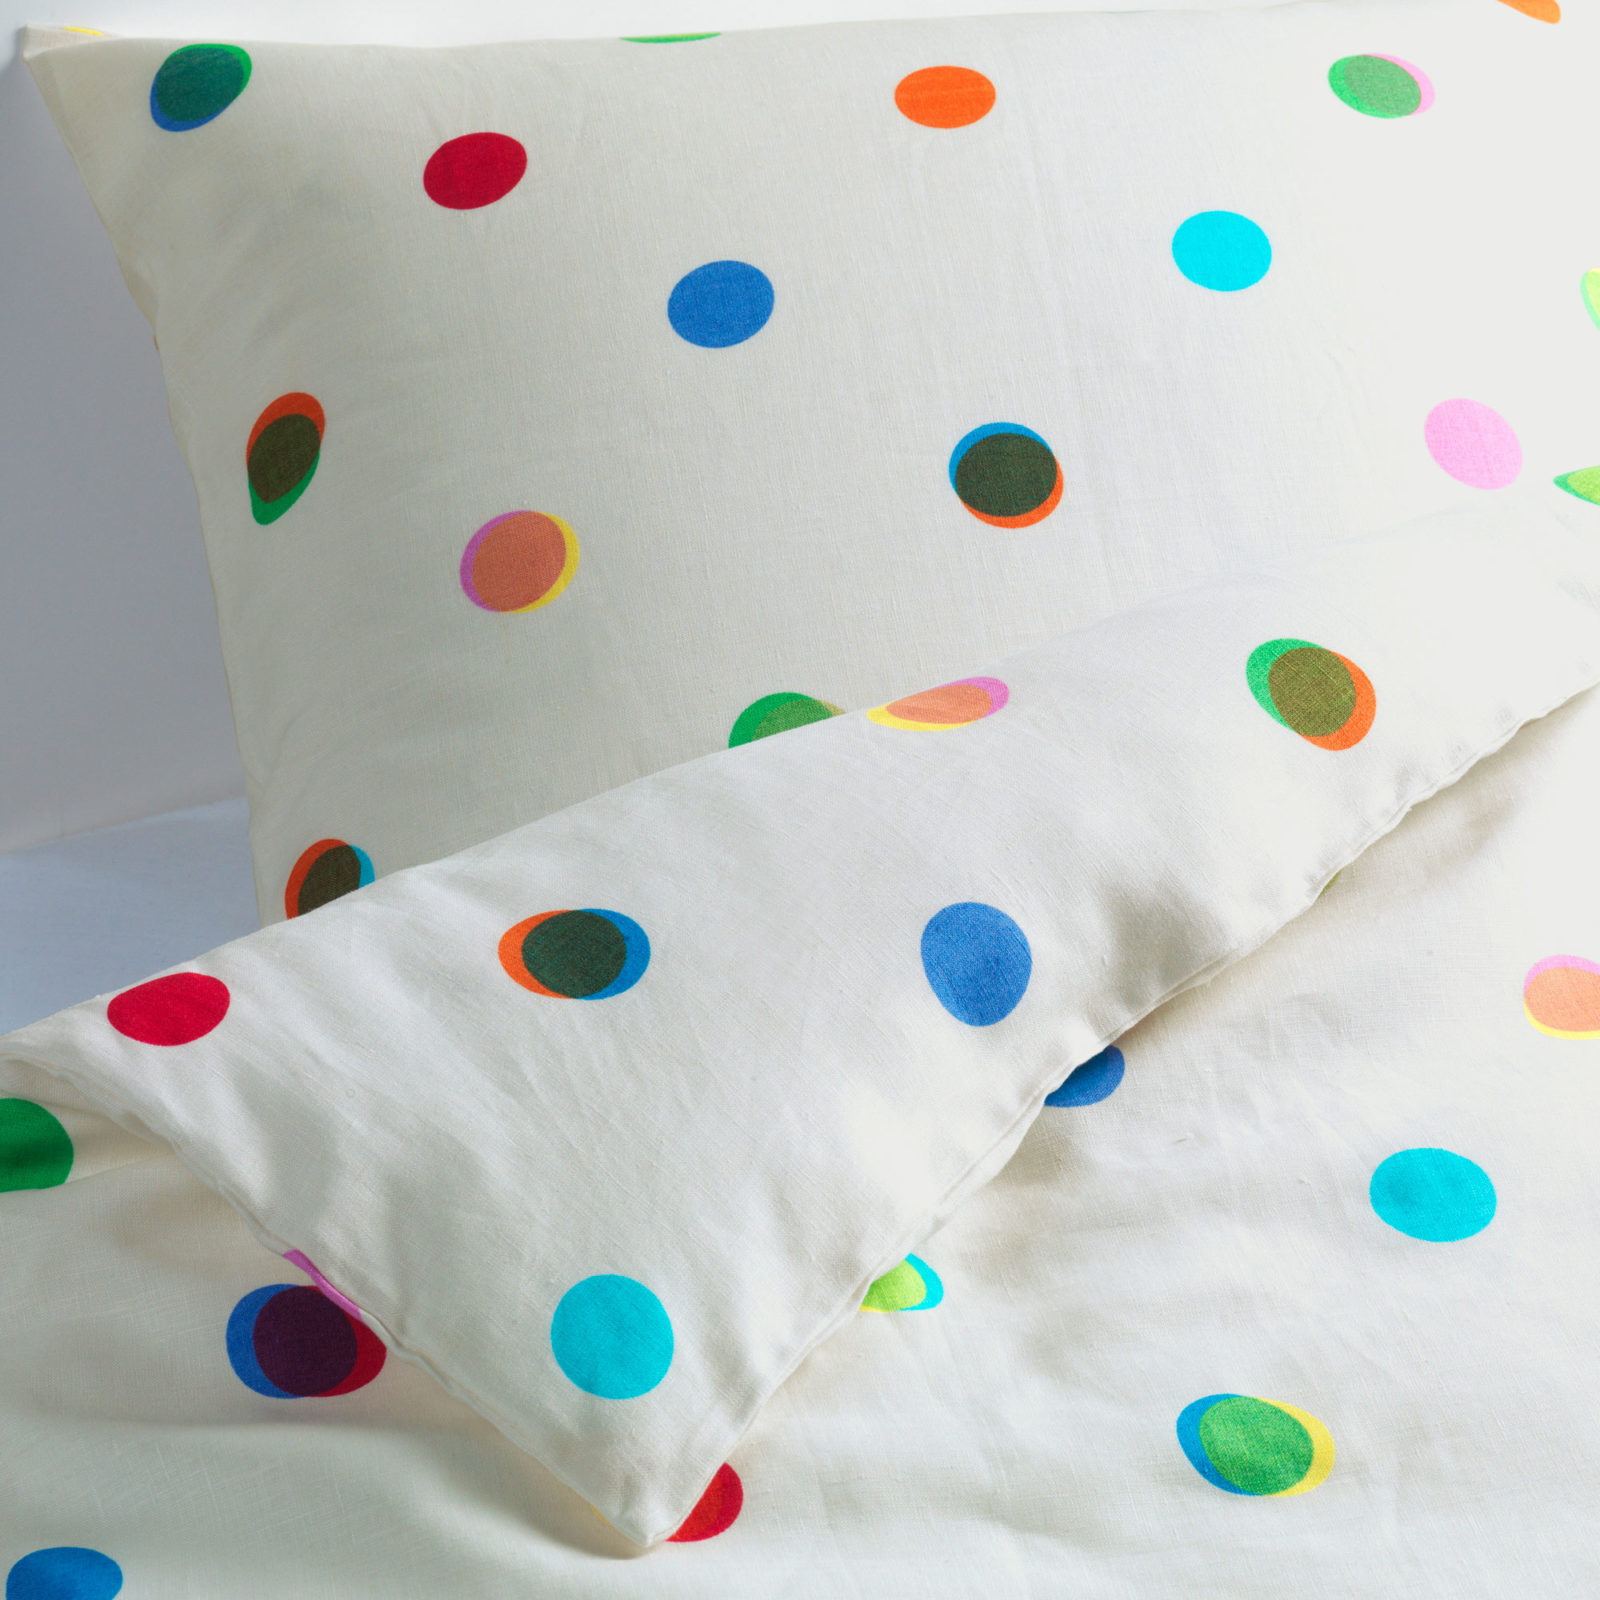 White quilt cover and pillow case with different coloured dots overlapping each other.